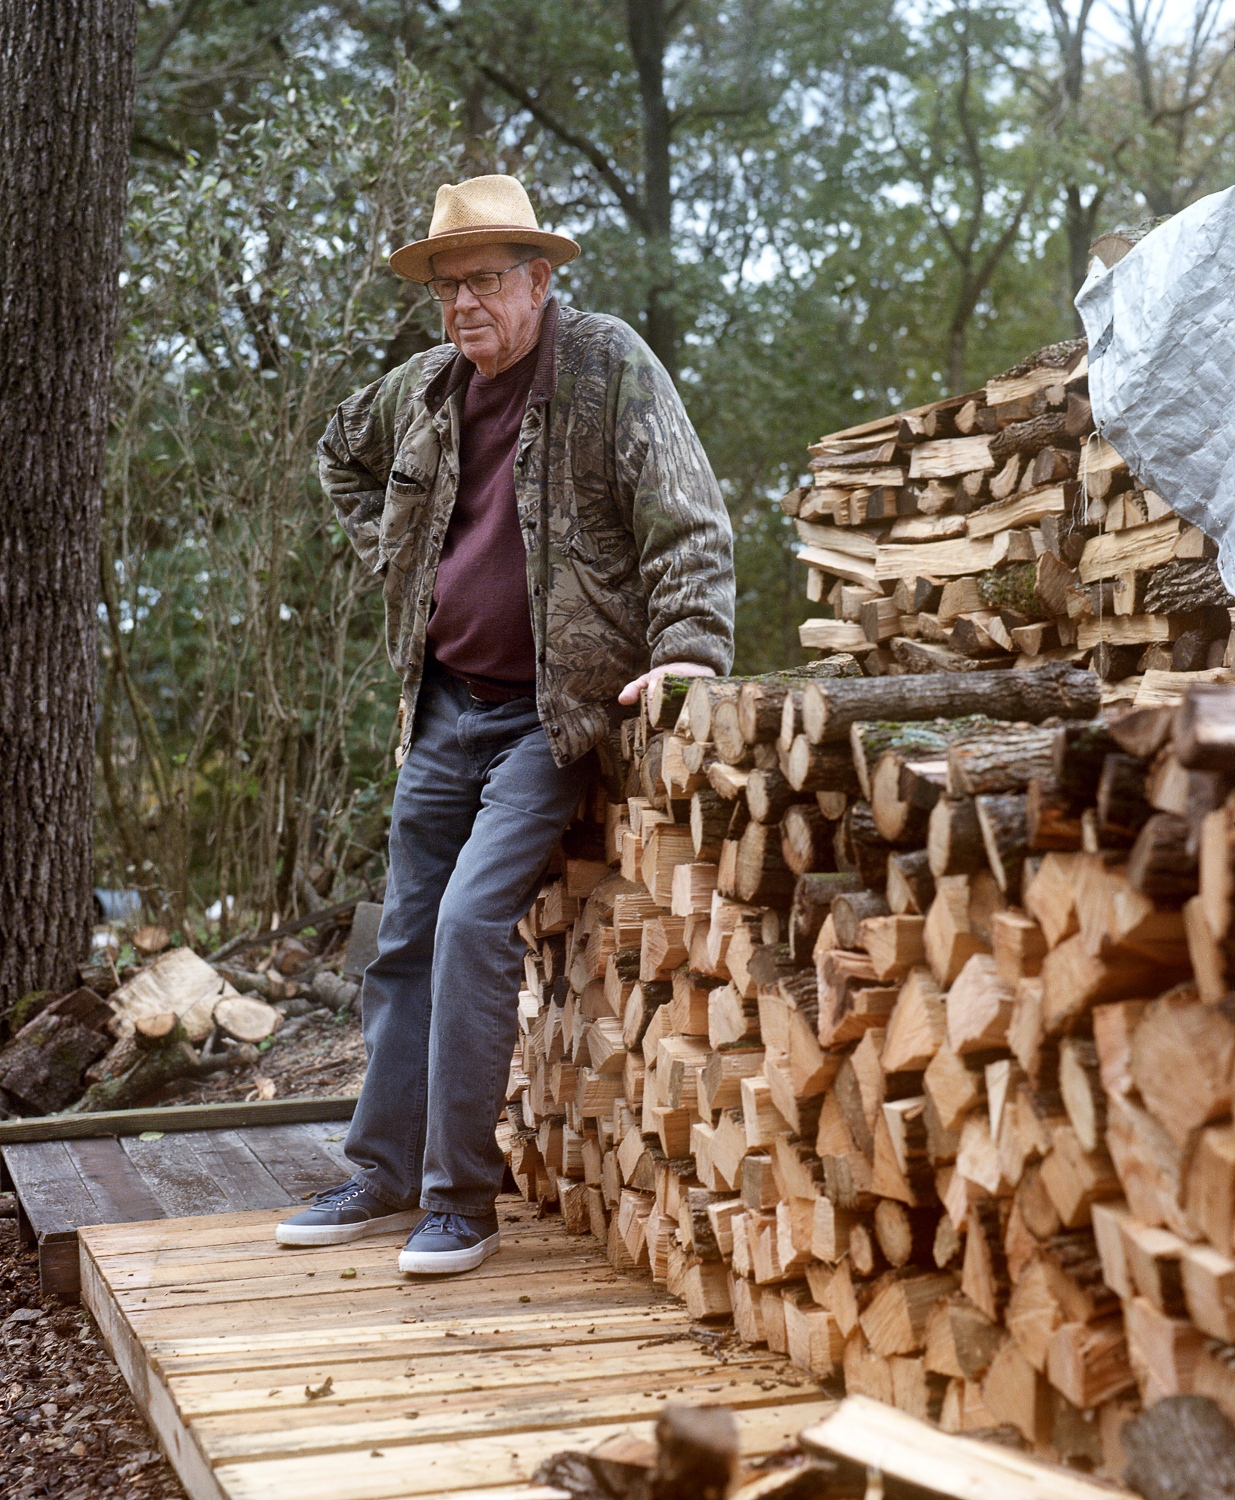 Grandpa Posing by the Wood Pile